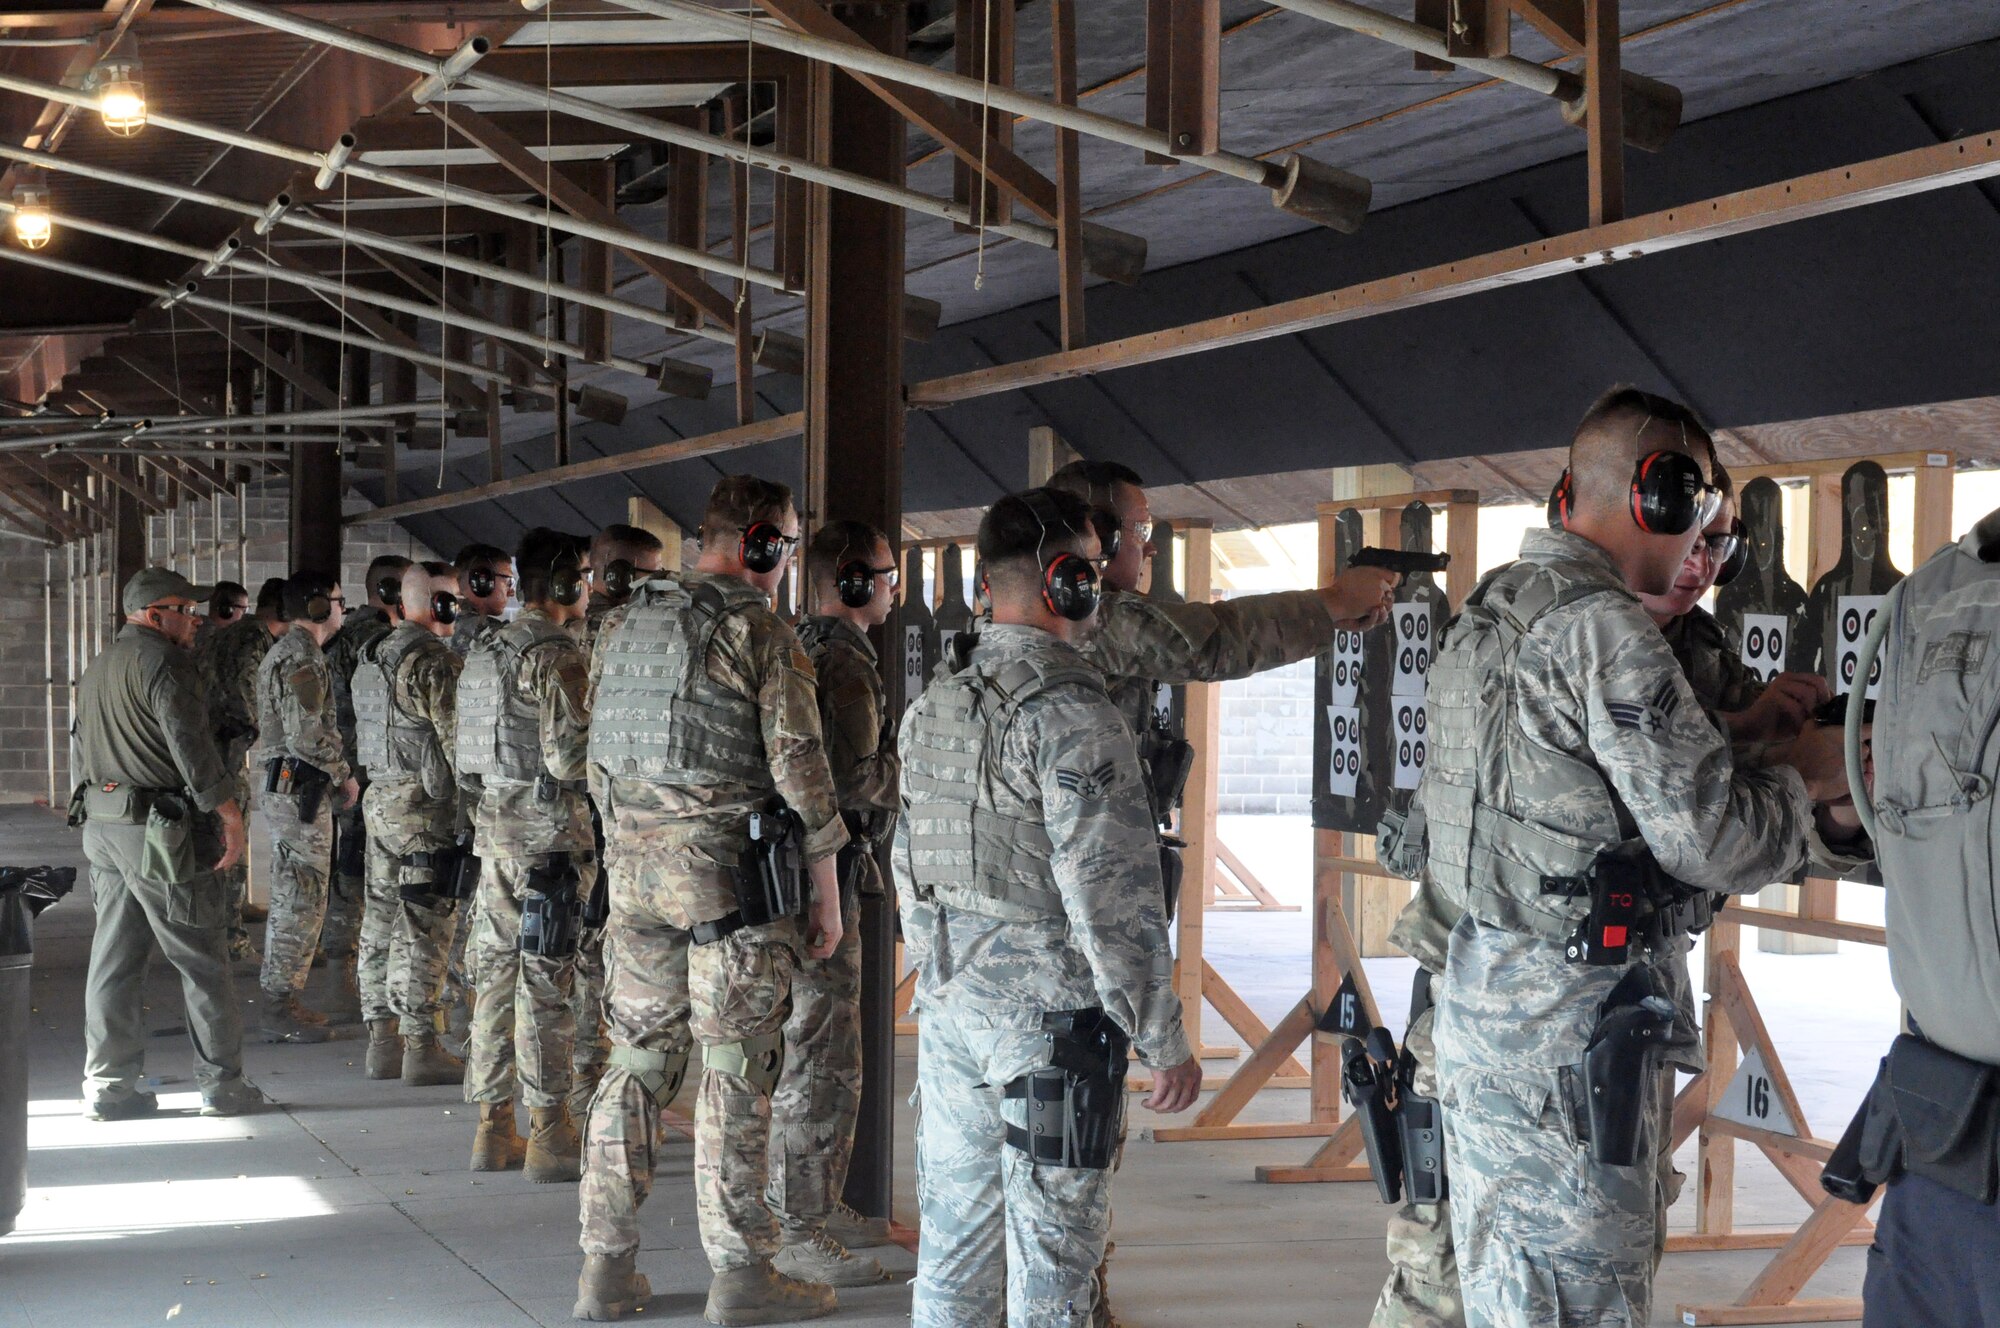 About 20 members of the 72nd Security Forces Squadron attended an advanced training course at the CATM range last week, aimed at diversifying their skillset and increasing the lethality of members. (U.S. Air Force photos/Megan Prather)